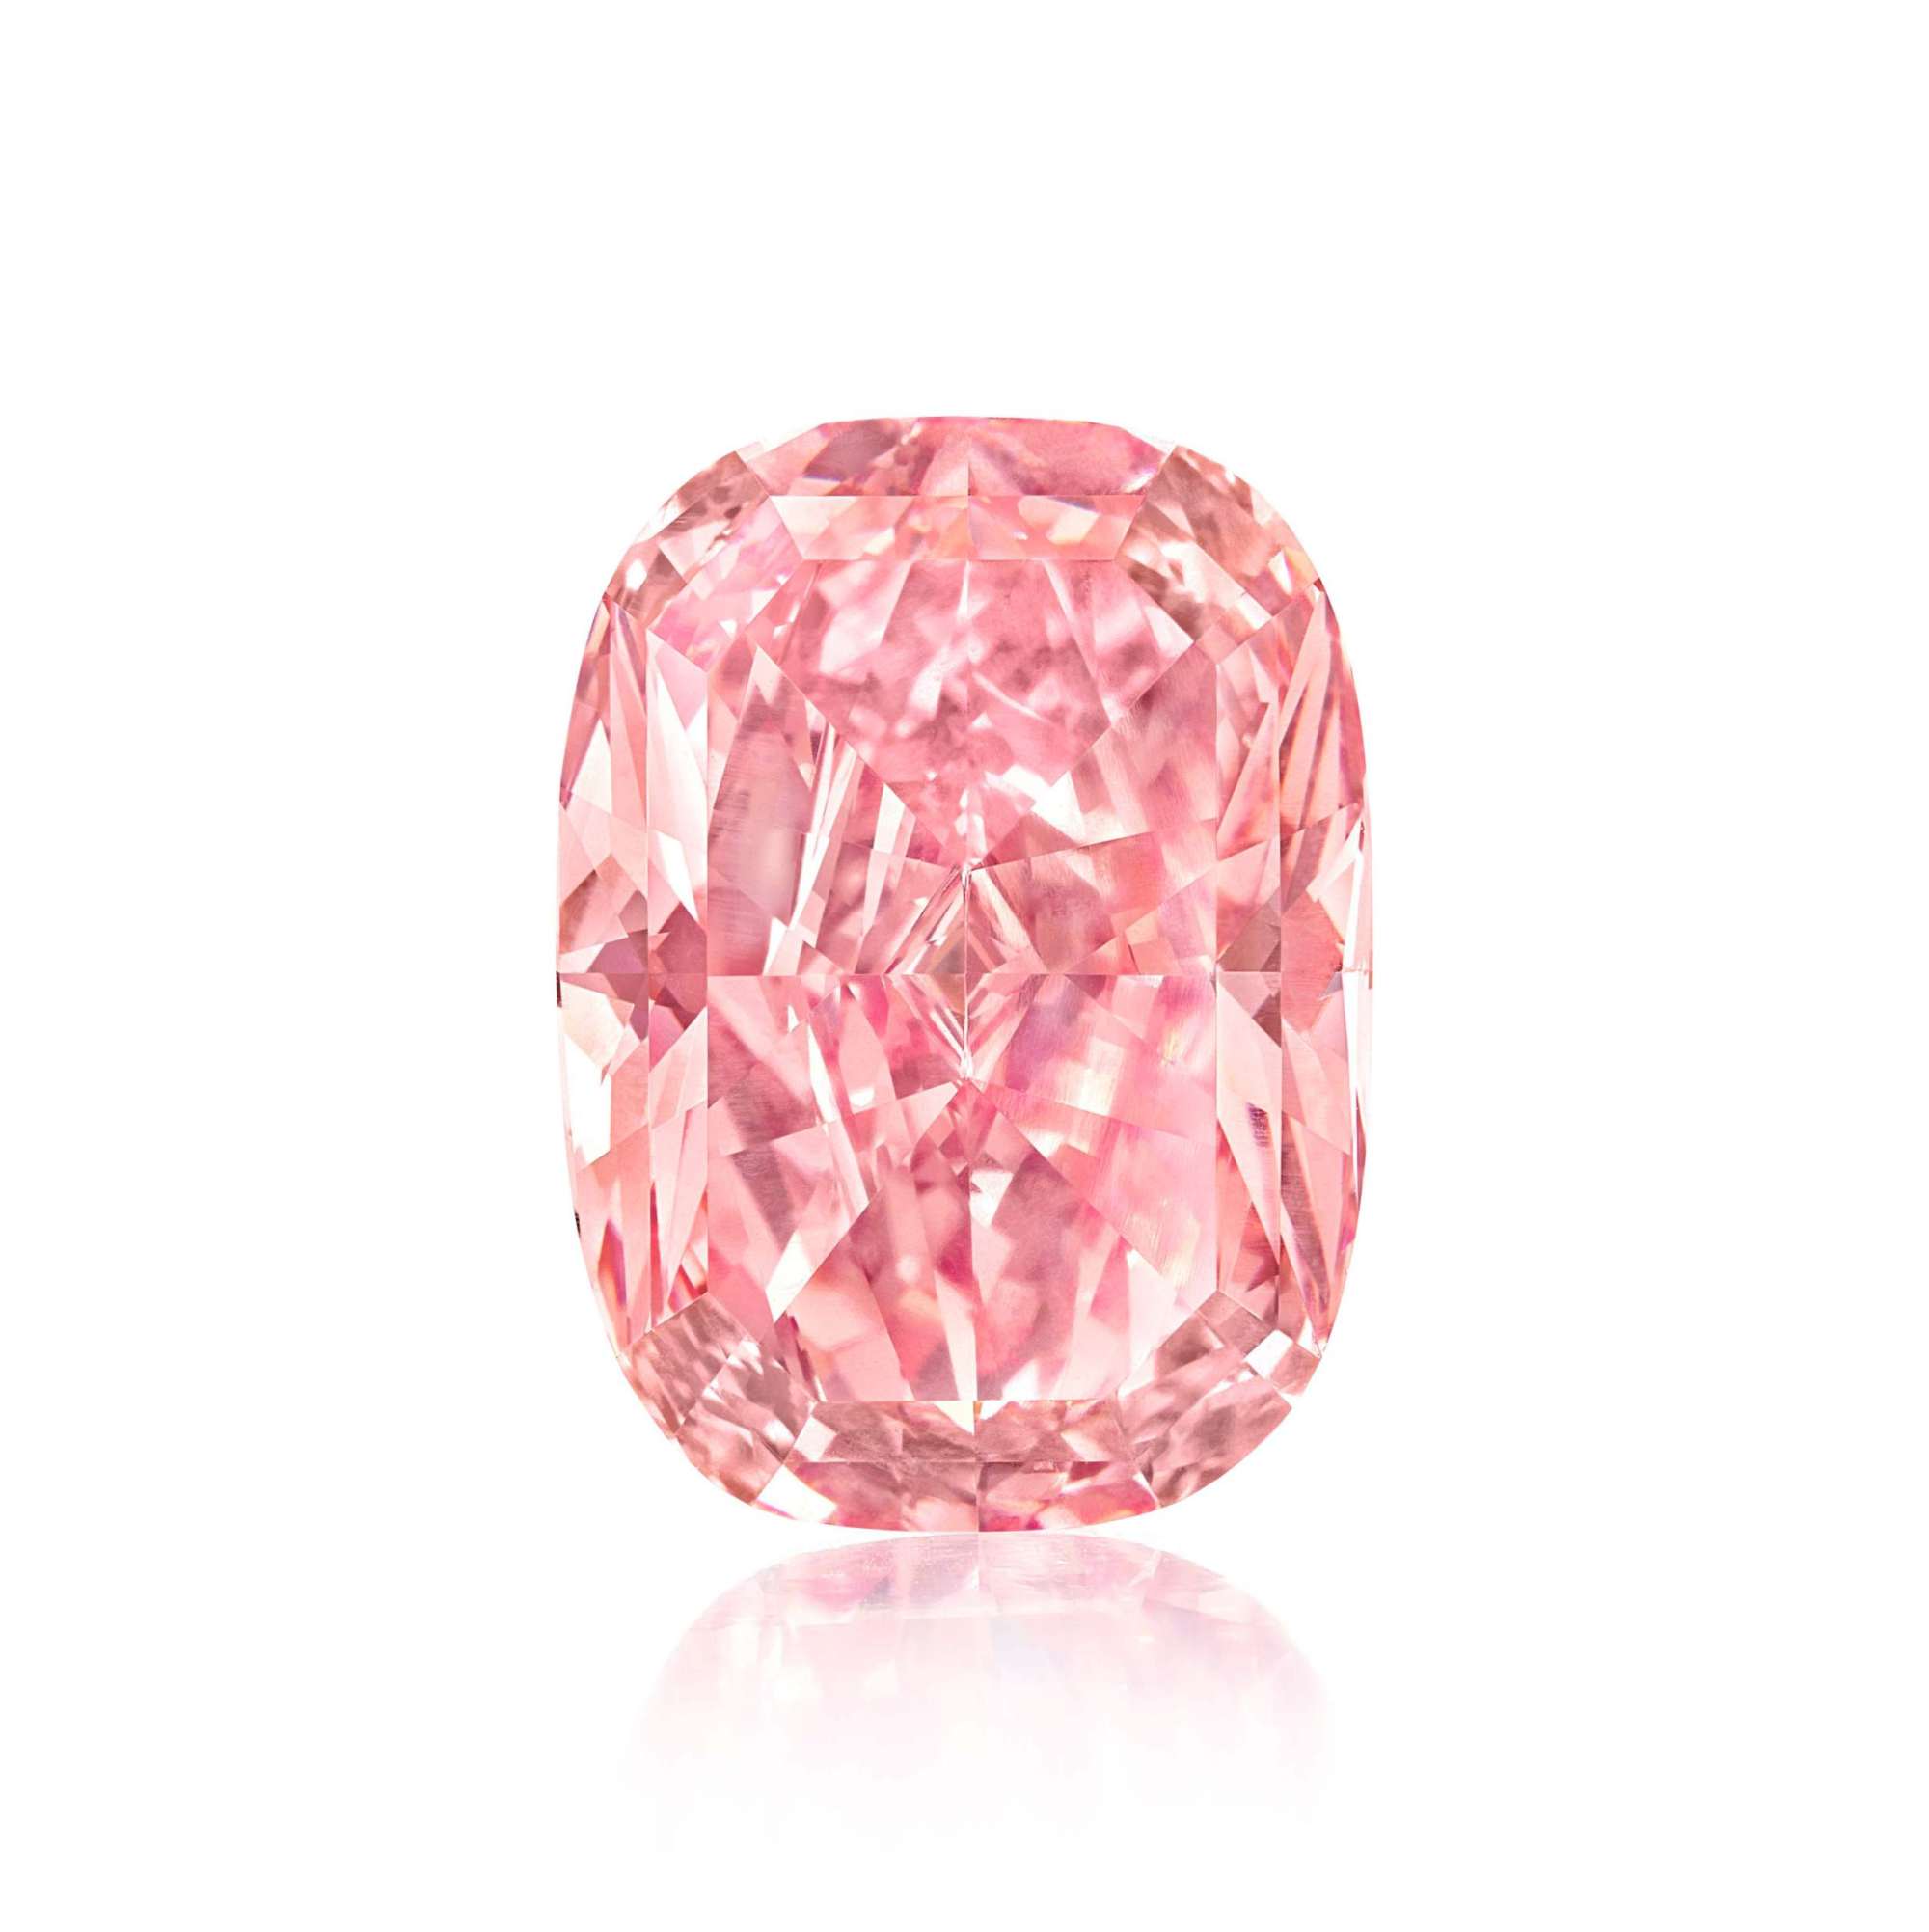 Why are pink diamonds so popular? From multimillion-dollar sales